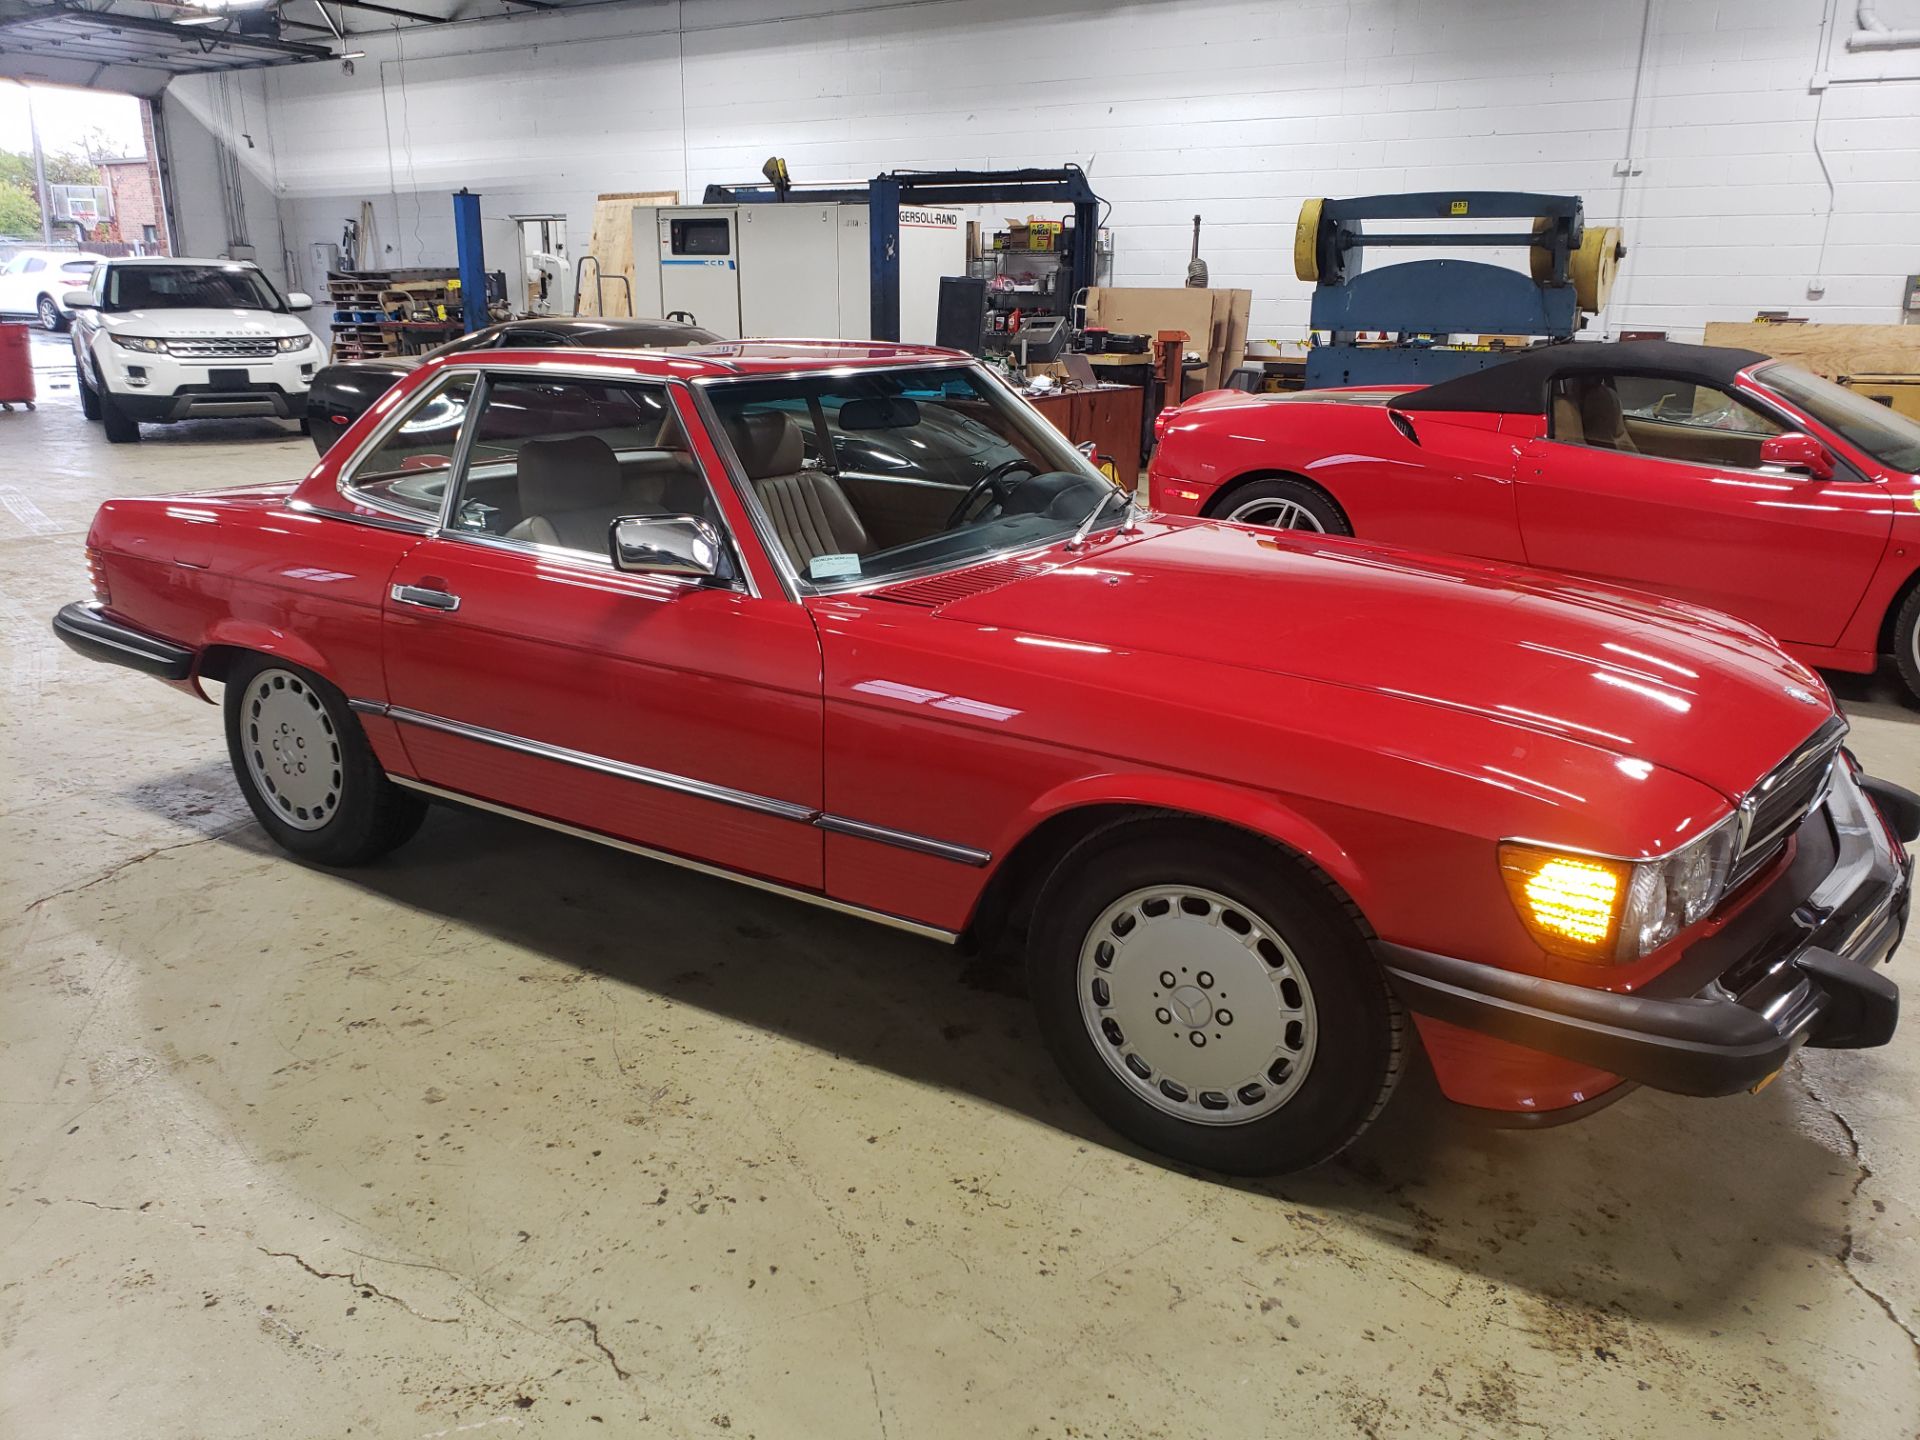 1986 MERCEDES BENZ 560SL ROADSTER CONVERTIBLE, 5.6L V-8, LEATHER, WITH SOFT TOP, AUTO., VIN WDBBA4 - Image 2 of 8